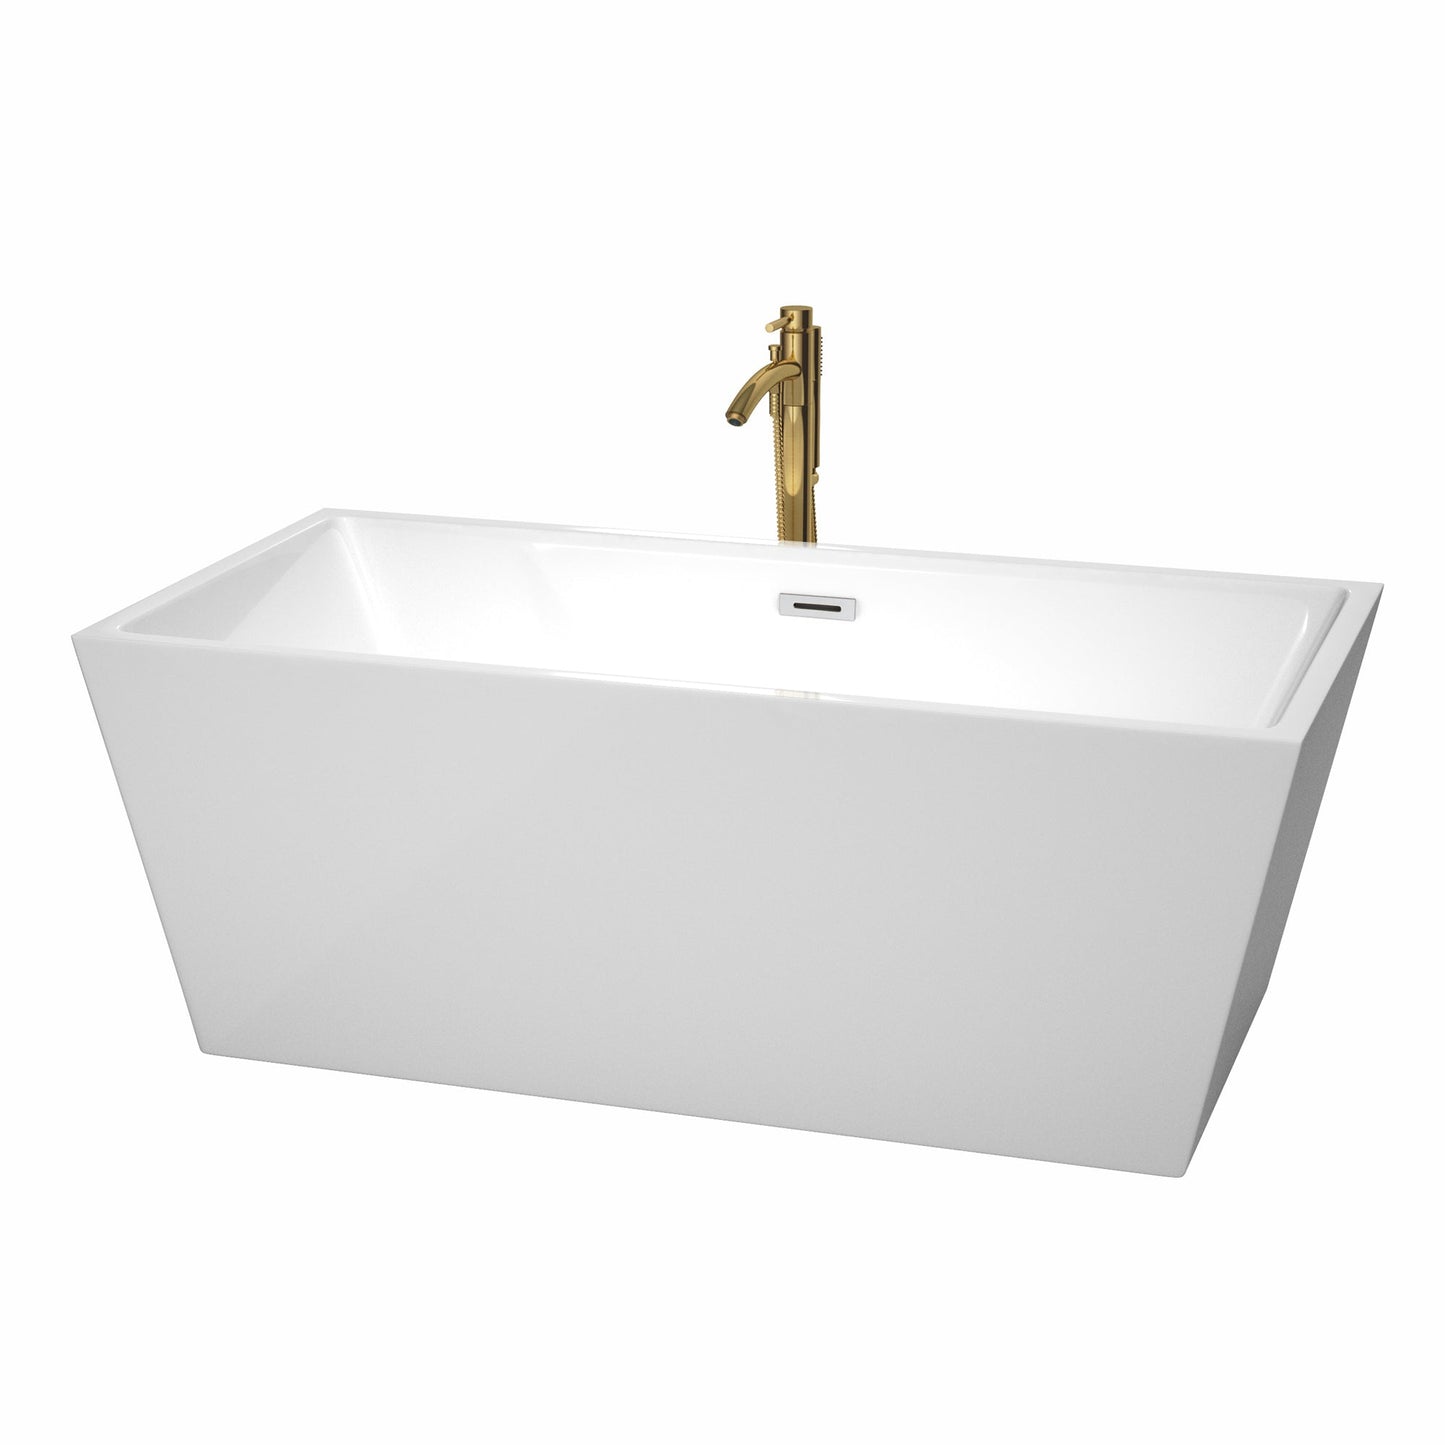 Wyndham Collection Sara 63" Freestanding Bathtub in White With Polished Chrome Trim and Floor Mounted Faucet in Brushed Gold